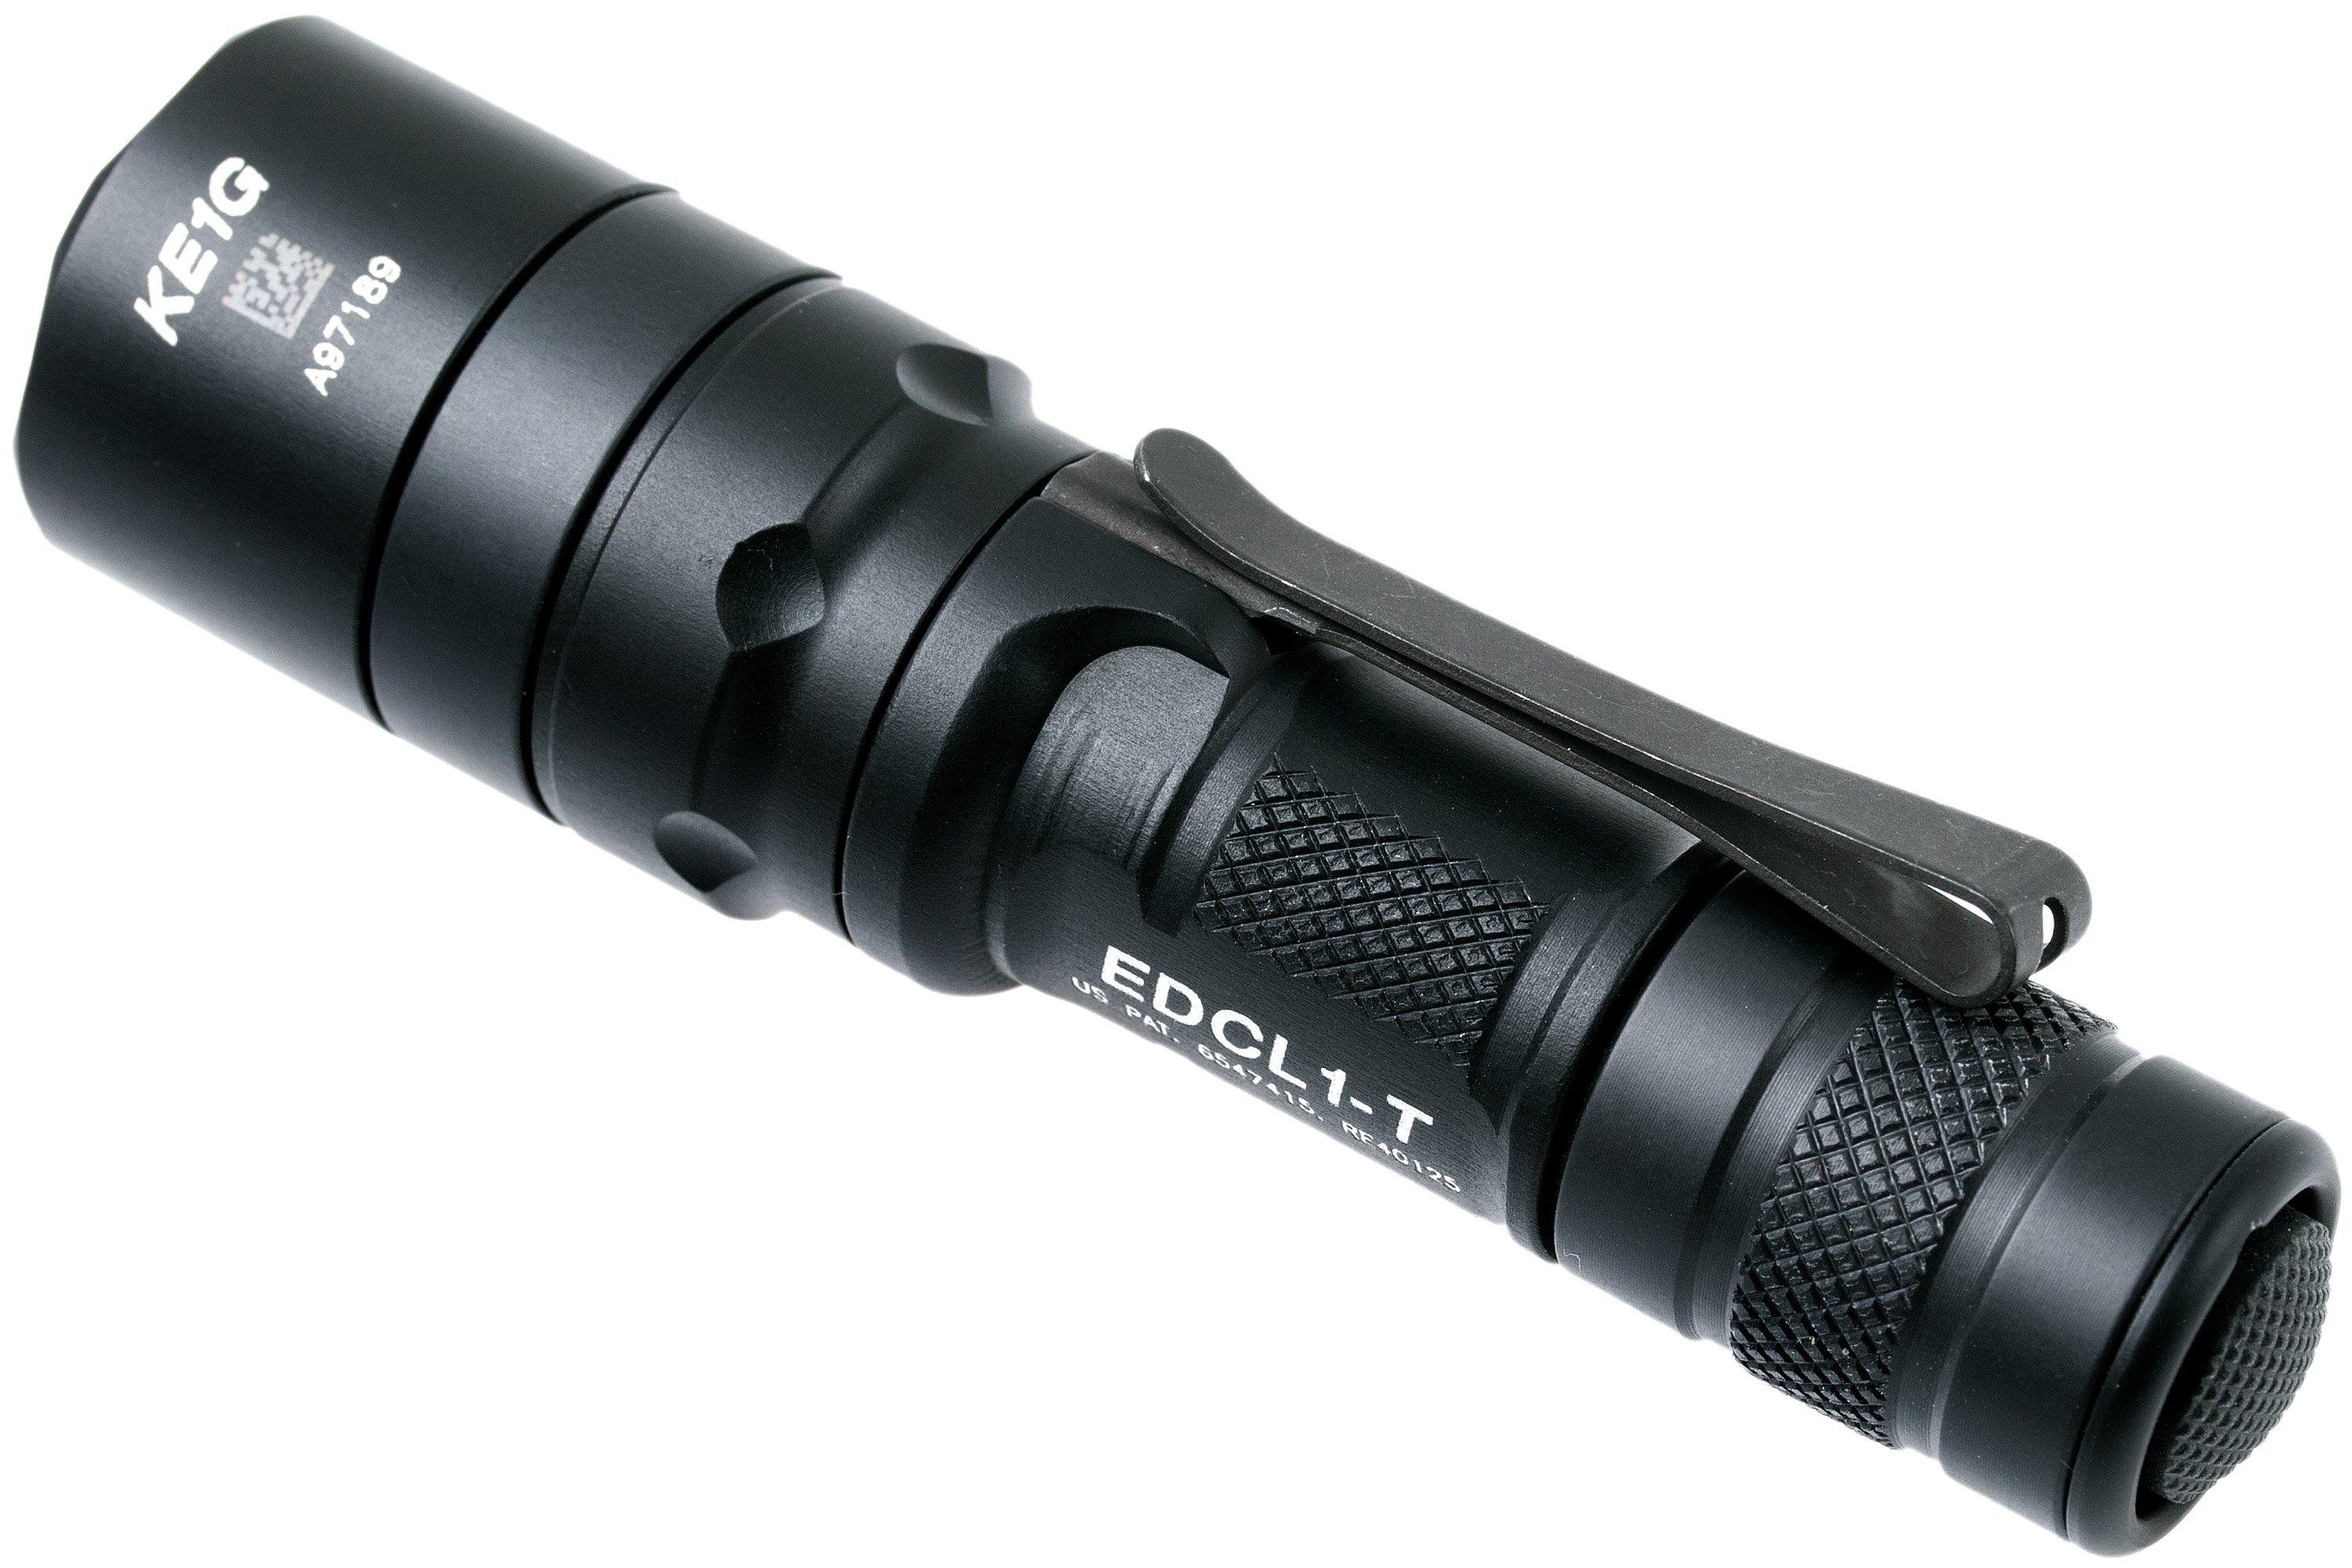 SUREFIRE(シュアファイア) EDCL1-T Dual-Output Everyday Carry LED フラッシュ - 1